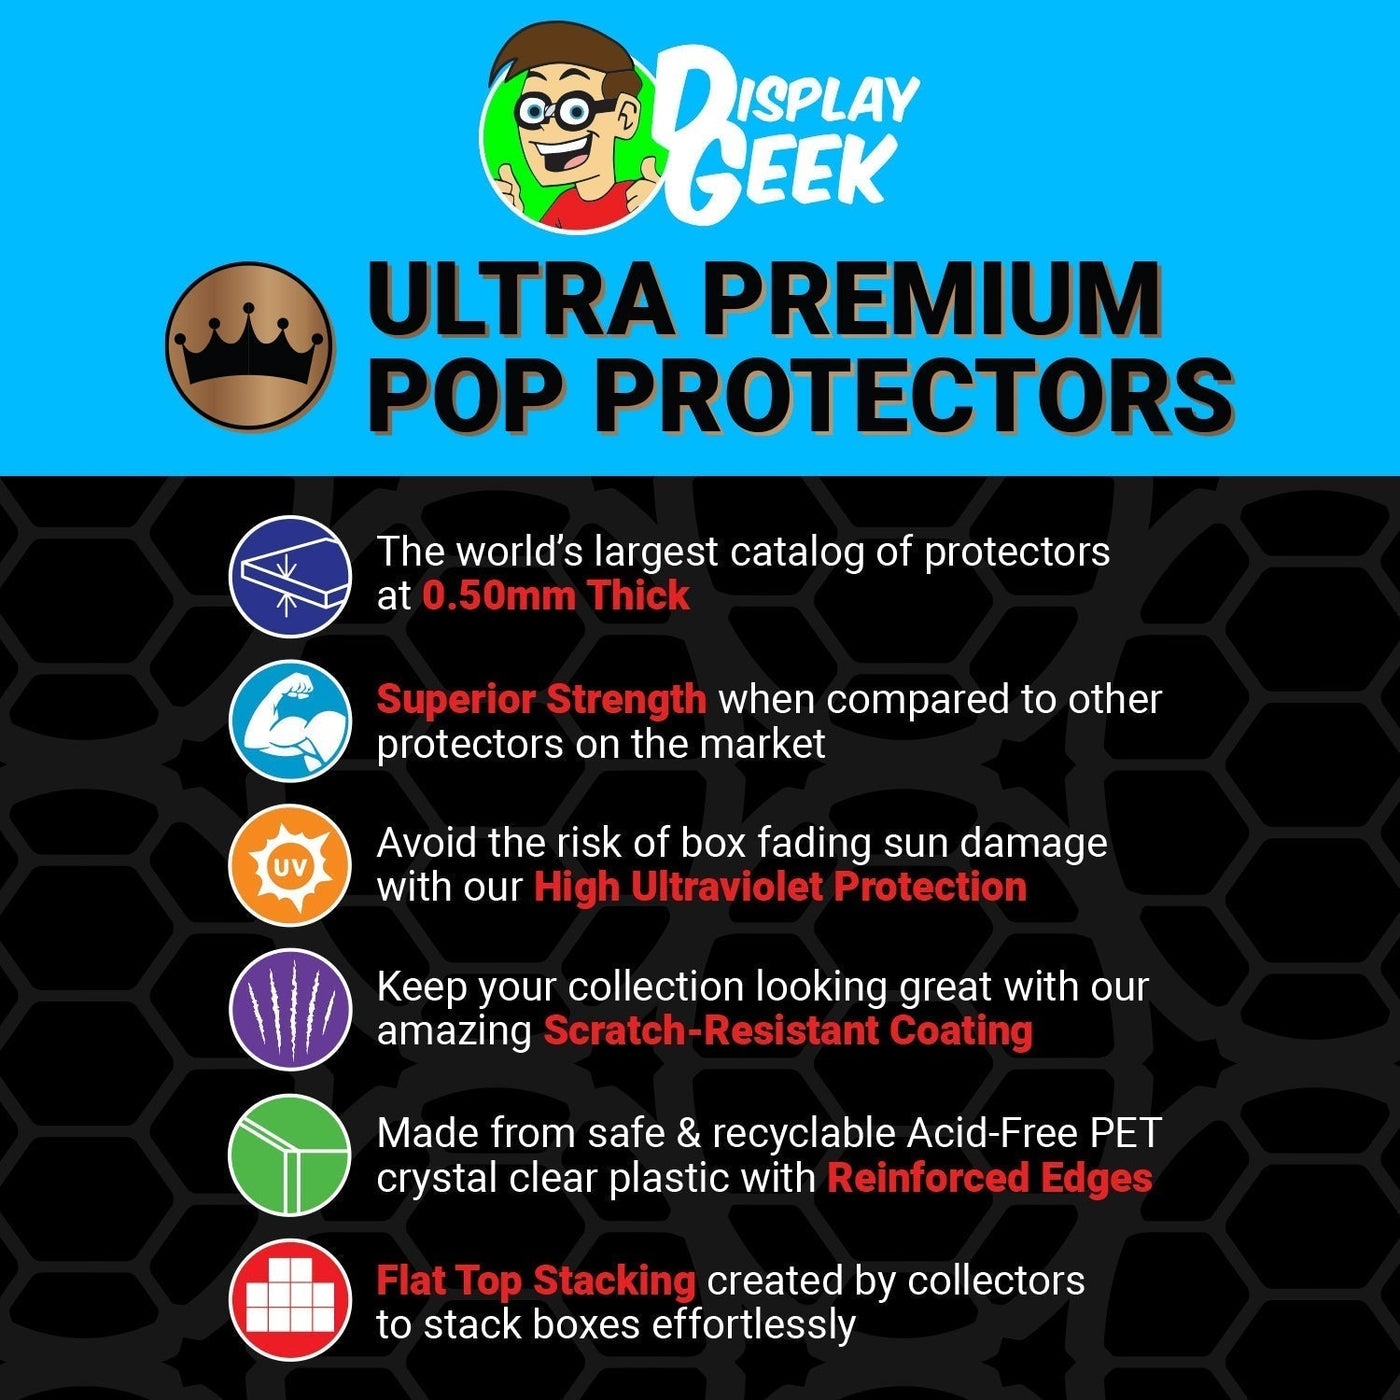 Pop Protector for 6 inch Giant Lady Red #99 Super Funko Pop on The Protector Guide App by Display Geek